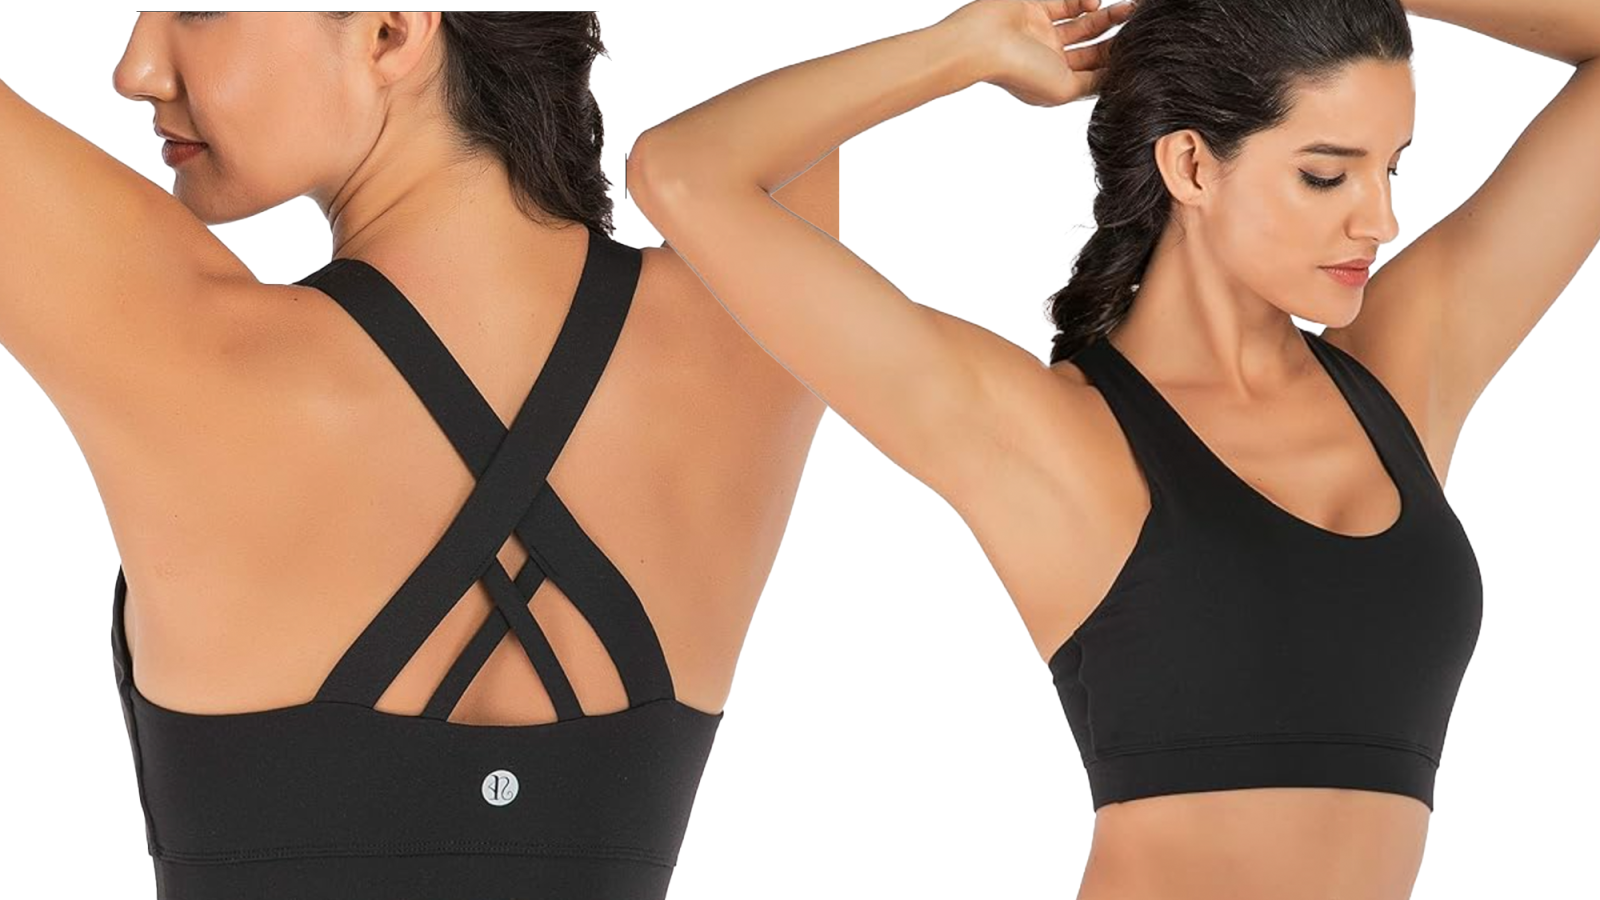 This 'Breathable' Sports Bra Is Only $18 at